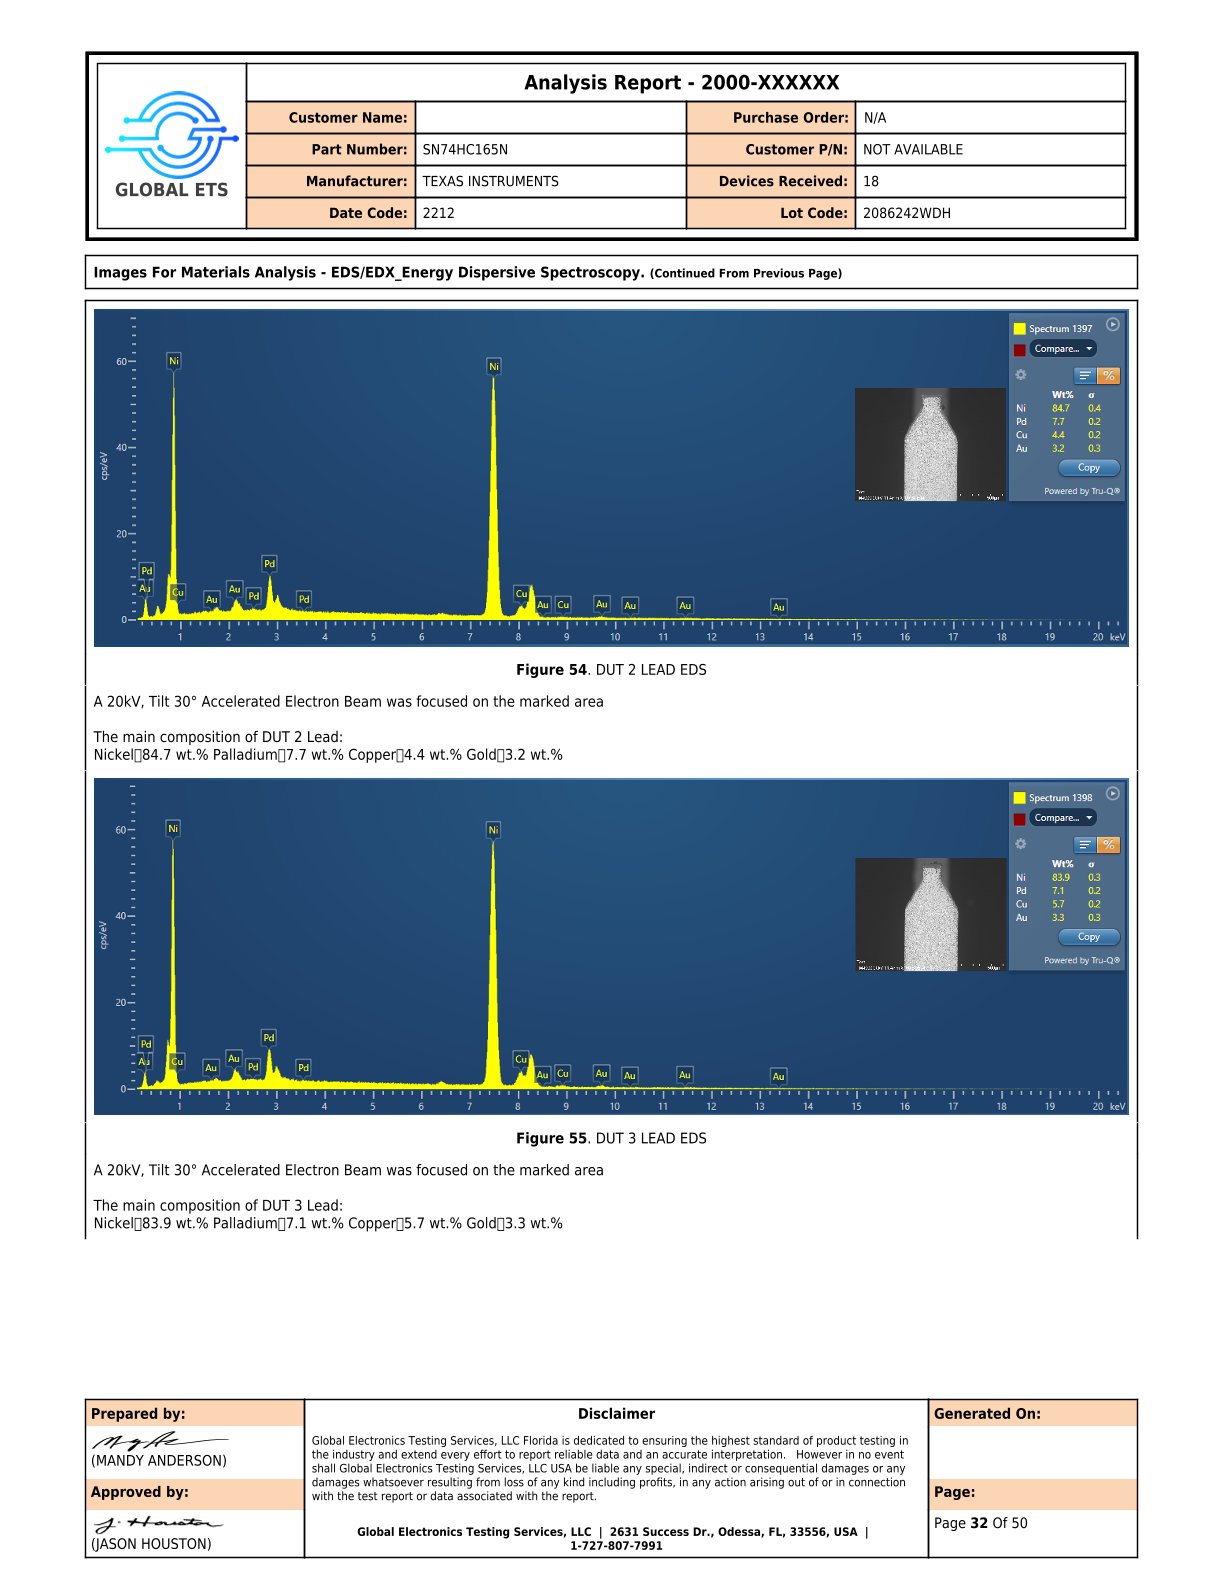 Analysis report by Global ETS with customer name, part number, manufacturer details, and images for materials analysis - EDS/EDX Energy Dispersive Spectroscopy showing charts with peaks indicating the presence of elements like Nitrogen, Lead, Nickel, Gold, Palladium, and Copper in the samples. Two figures, 54 and 55, display the EDS results with corresponding compositions. 